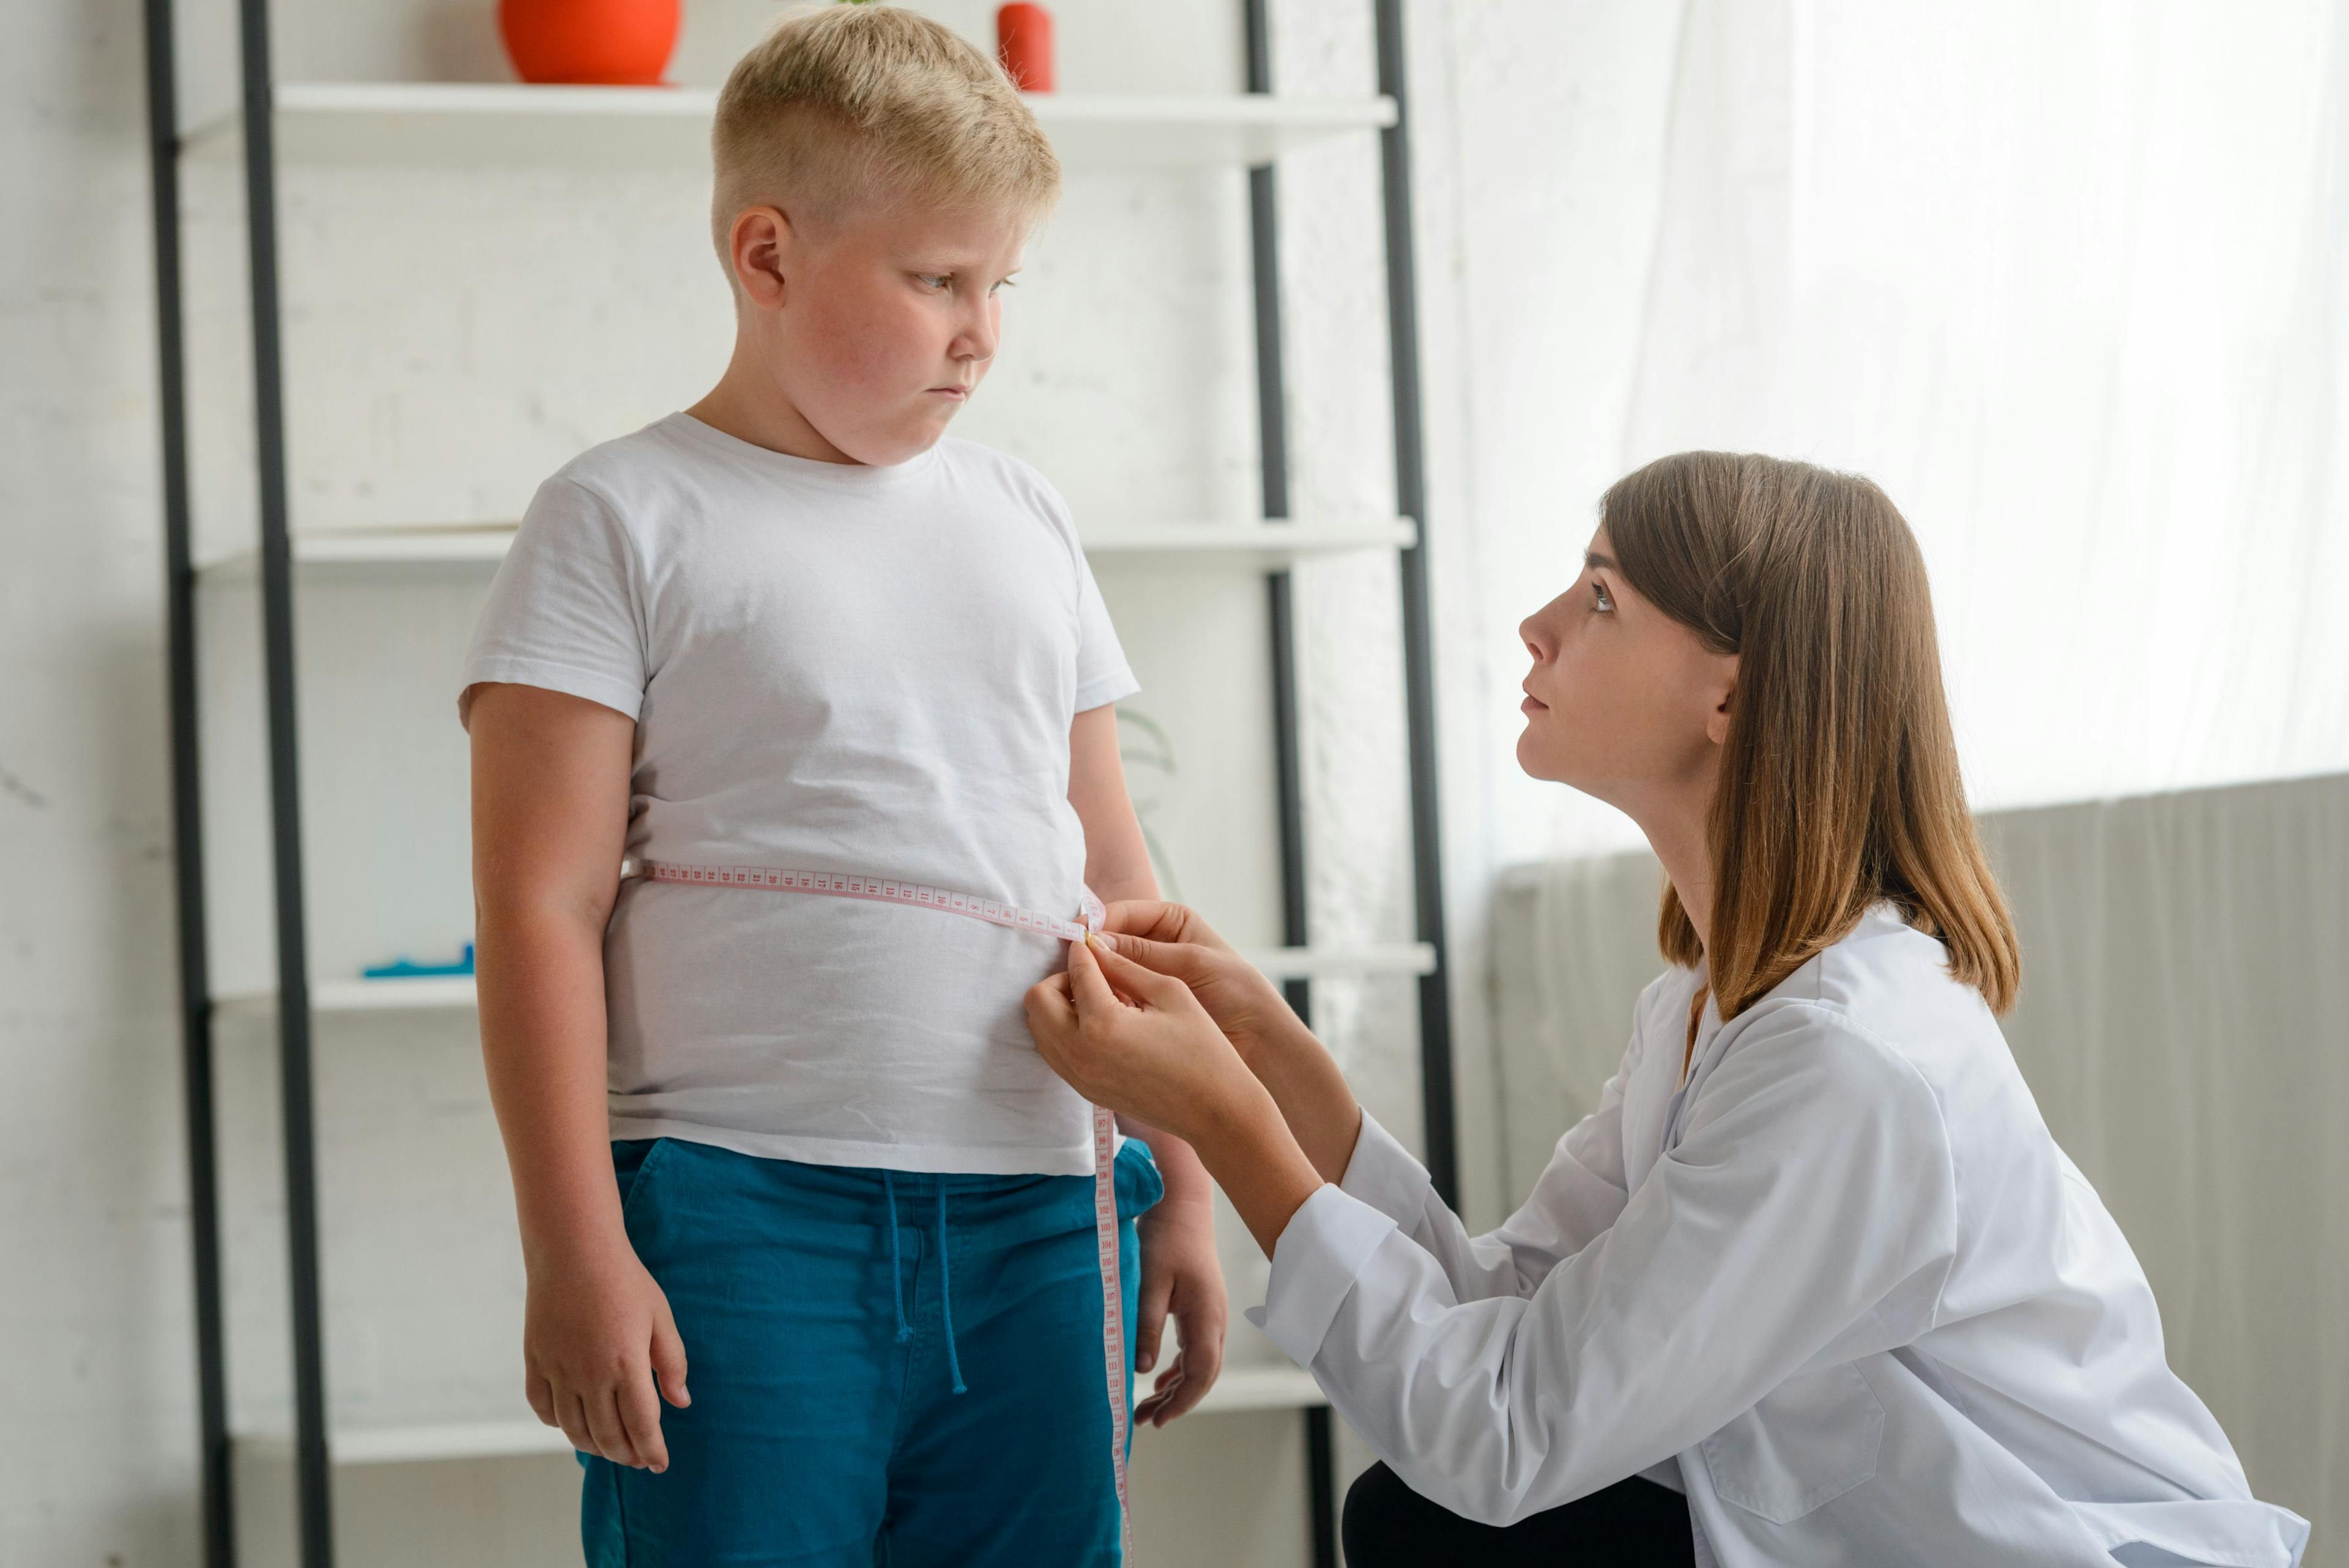 Butyrate effective for treating pediatric obesity